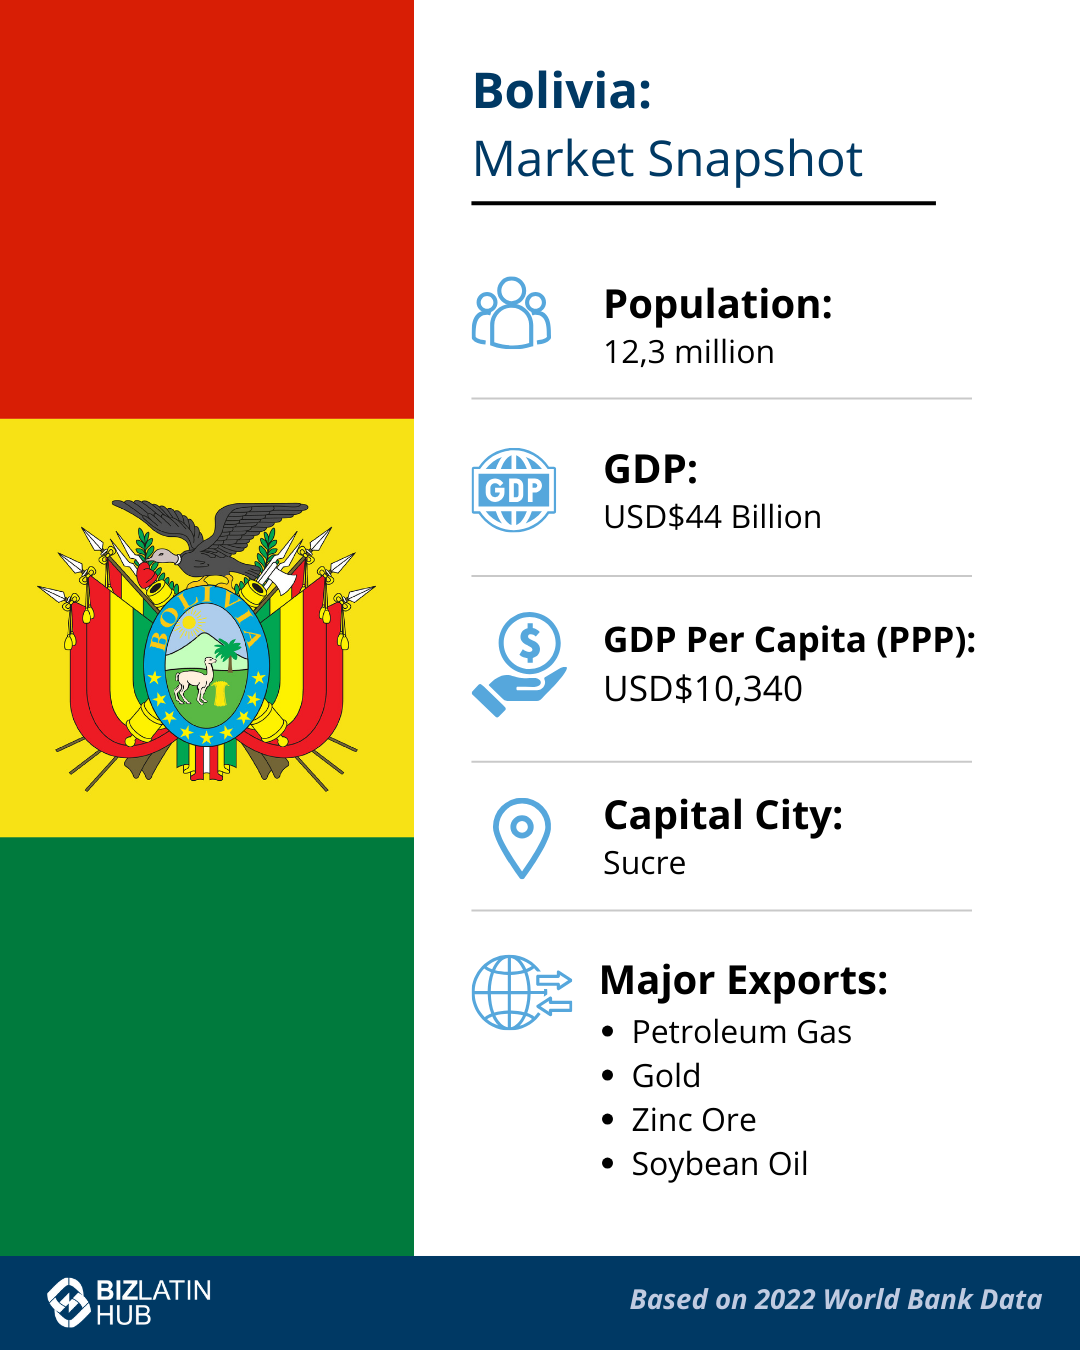 An infographic titled "Bolivia: Market Snapshot" with the Bolivian flag. It includes data: Population: 12.3 million, GDP: USD $44 Billion, GDP Per Capita (PPP): USD $10,340, Capital City: Sucre, Major Exports: Petroleum Gas, Gold, Zinc Ore, and Soybean Oil—valuable information for any lawyer in Bolivia.